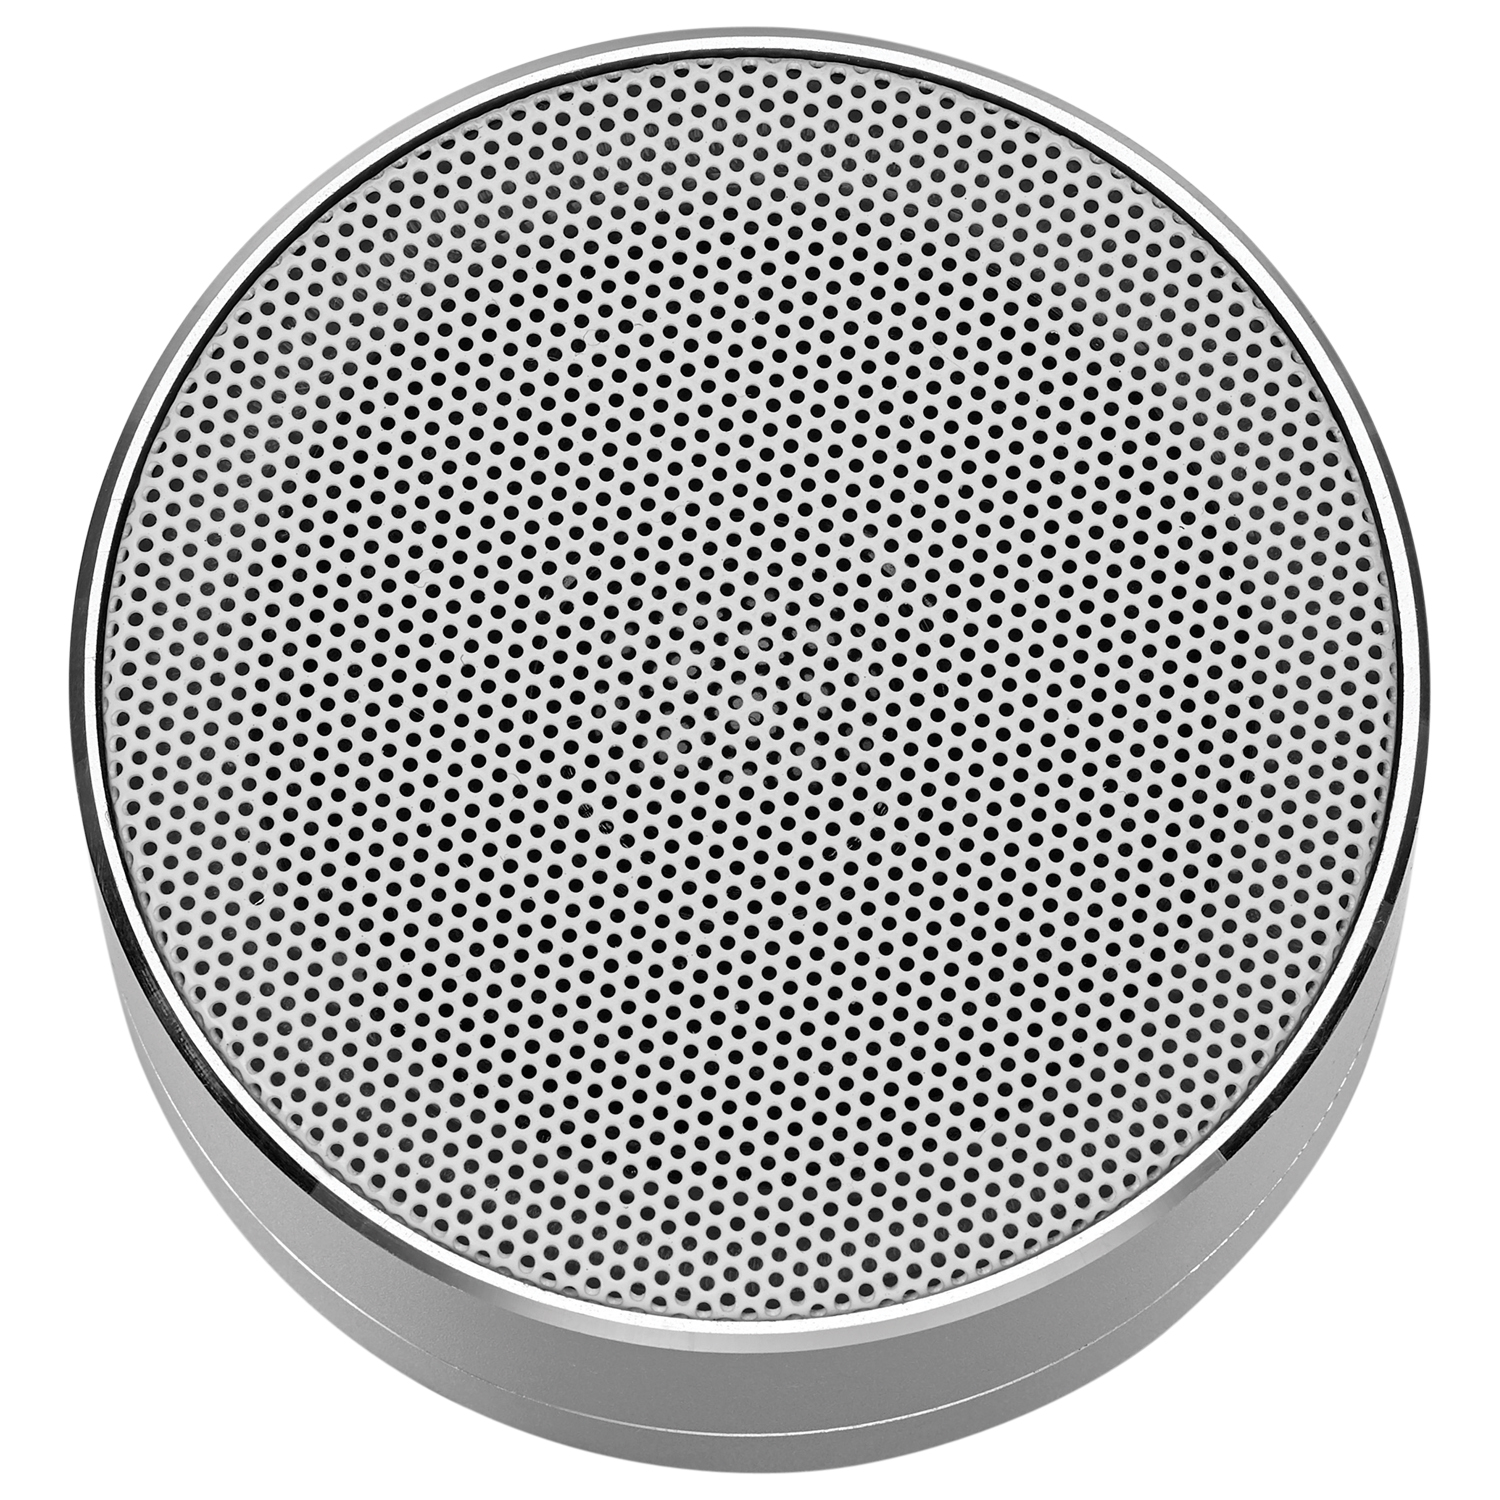 iLive Portable Bluetooth Speaker, Silver, ISB08 - image 2 of 6